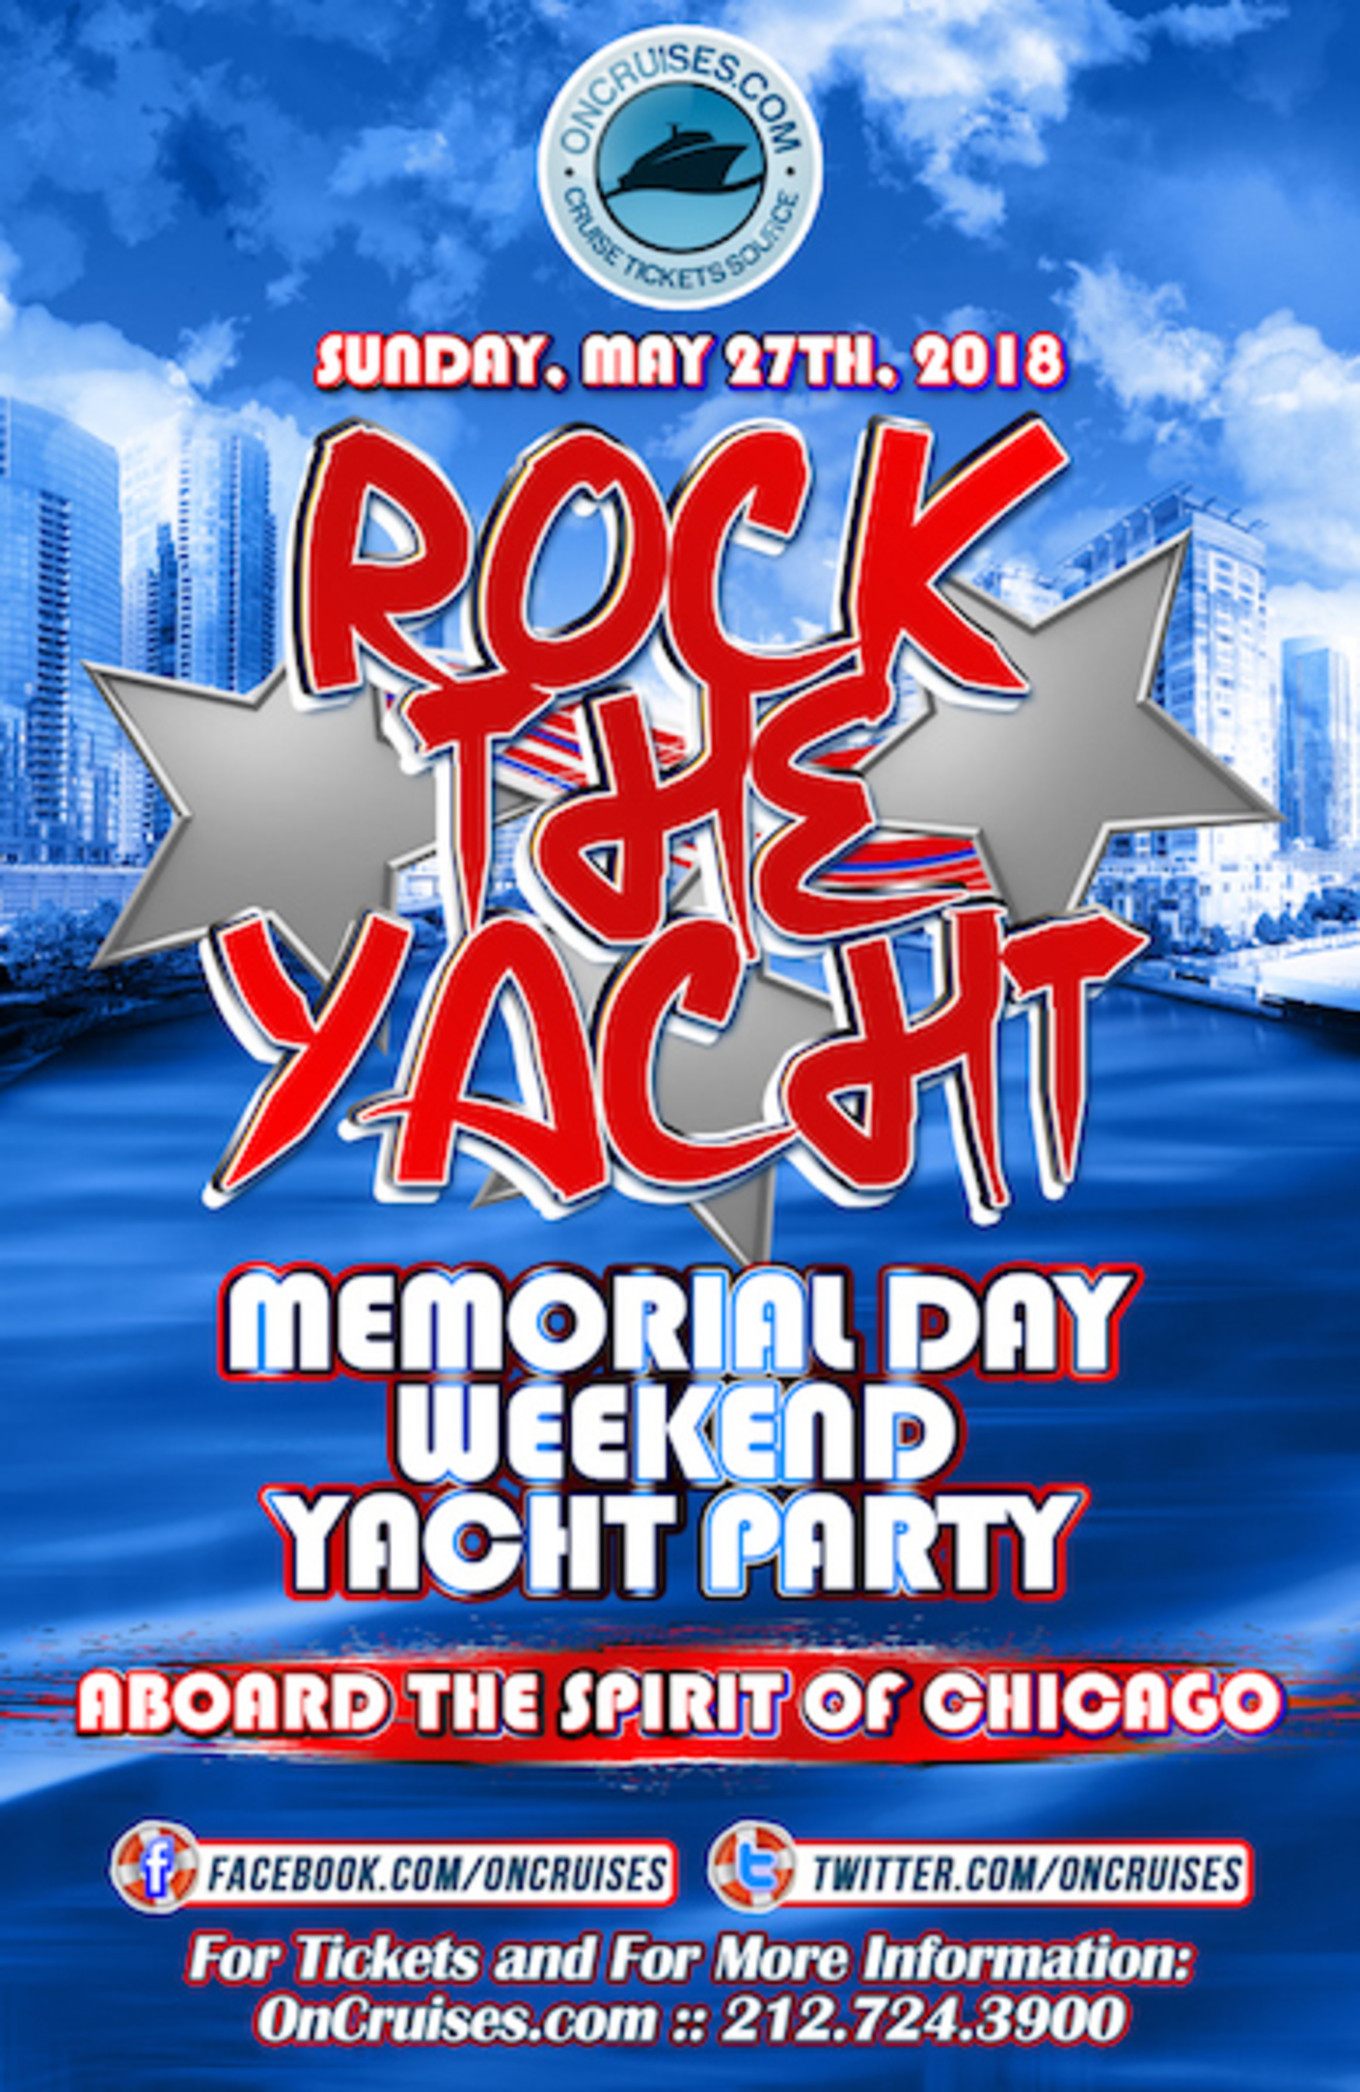 Memorial Day Weekend Party
 Rock the Yacht Memorial Day Weekend Yacht Party Aboard